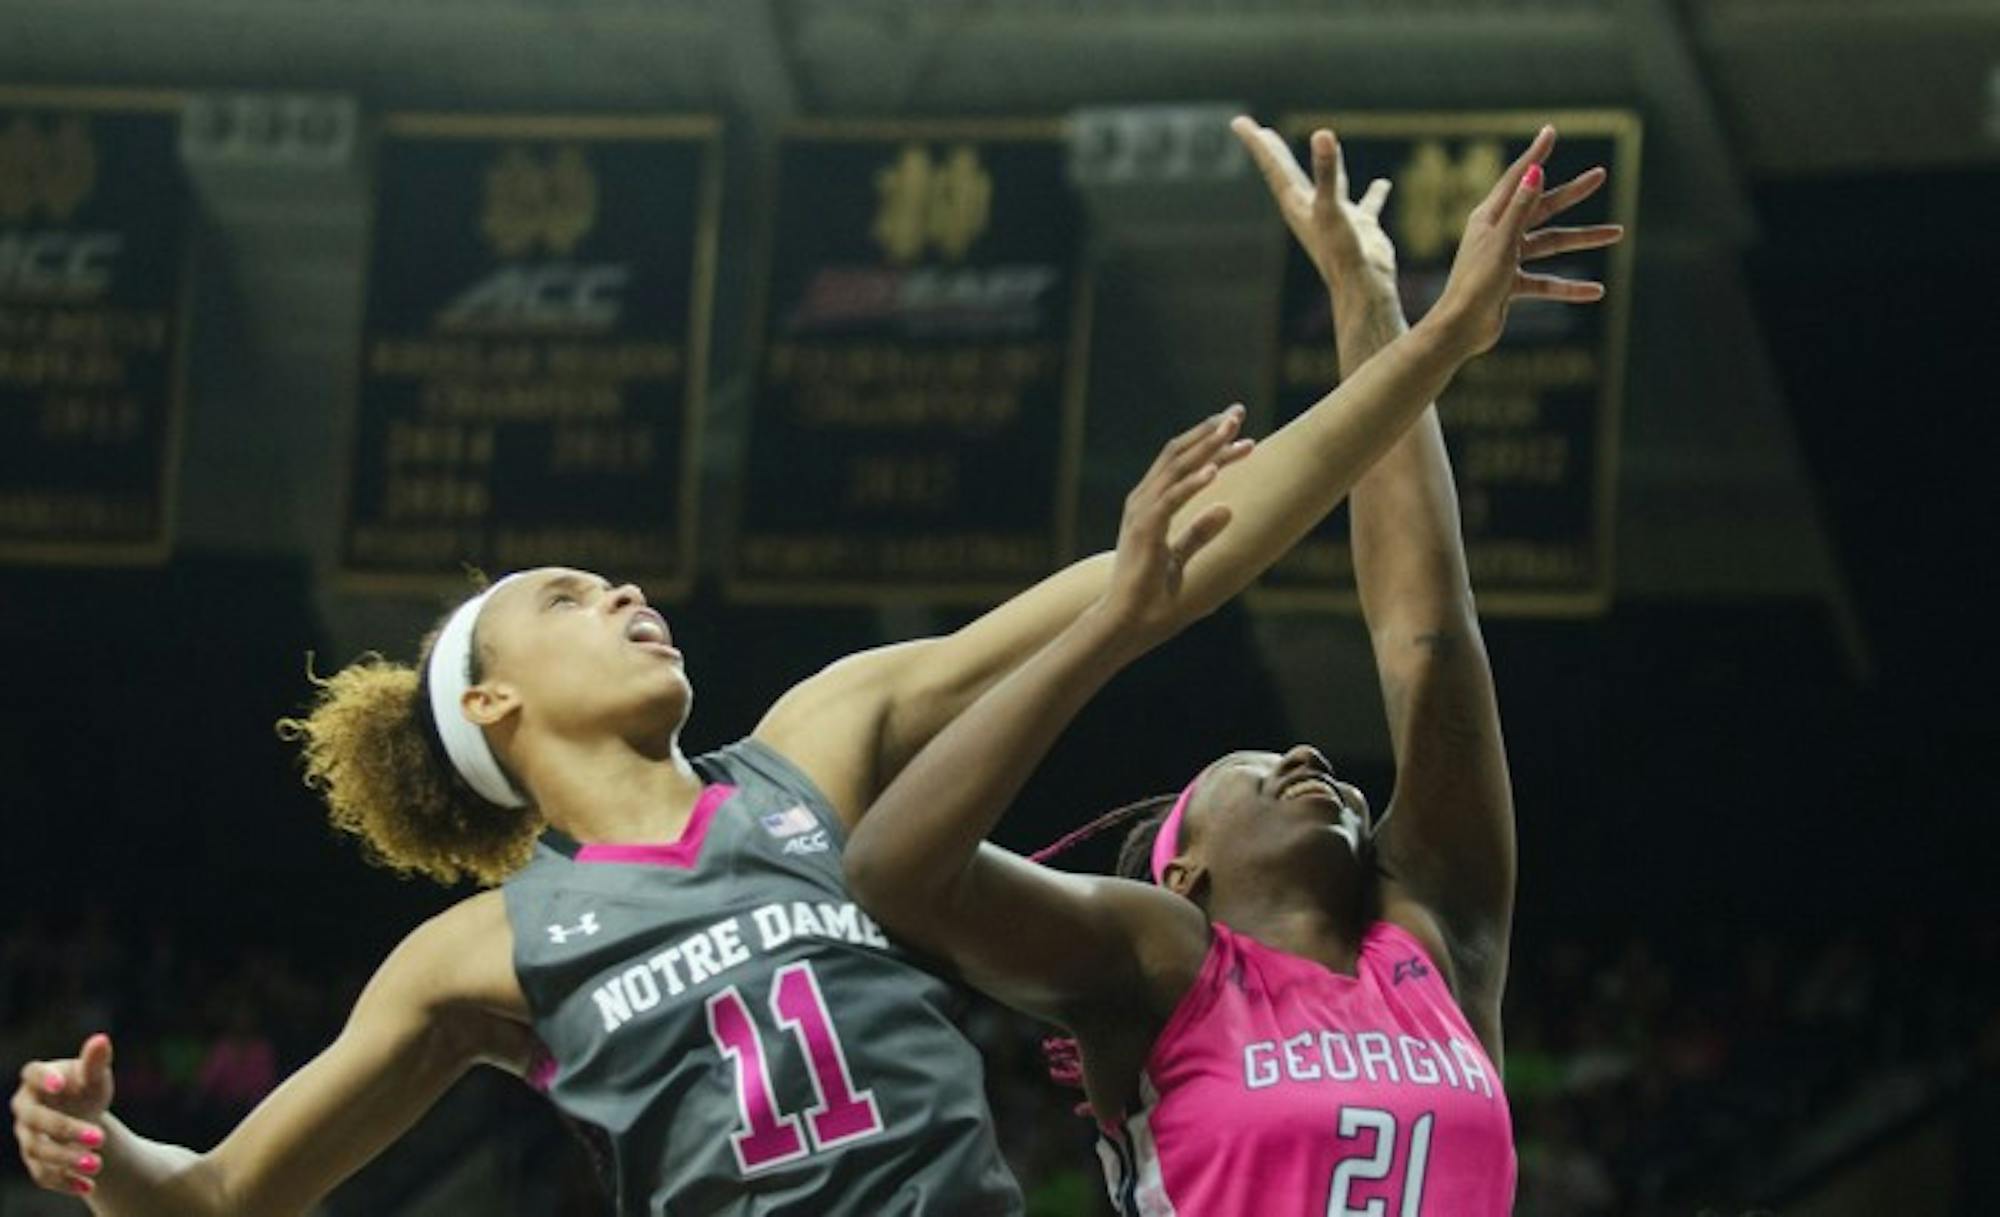 Irish junior forward Brianna Turner competes for a rebound during Notre Dame's 90-69 victory over Georgia Tech on Sunday at Purcell Pavilion.